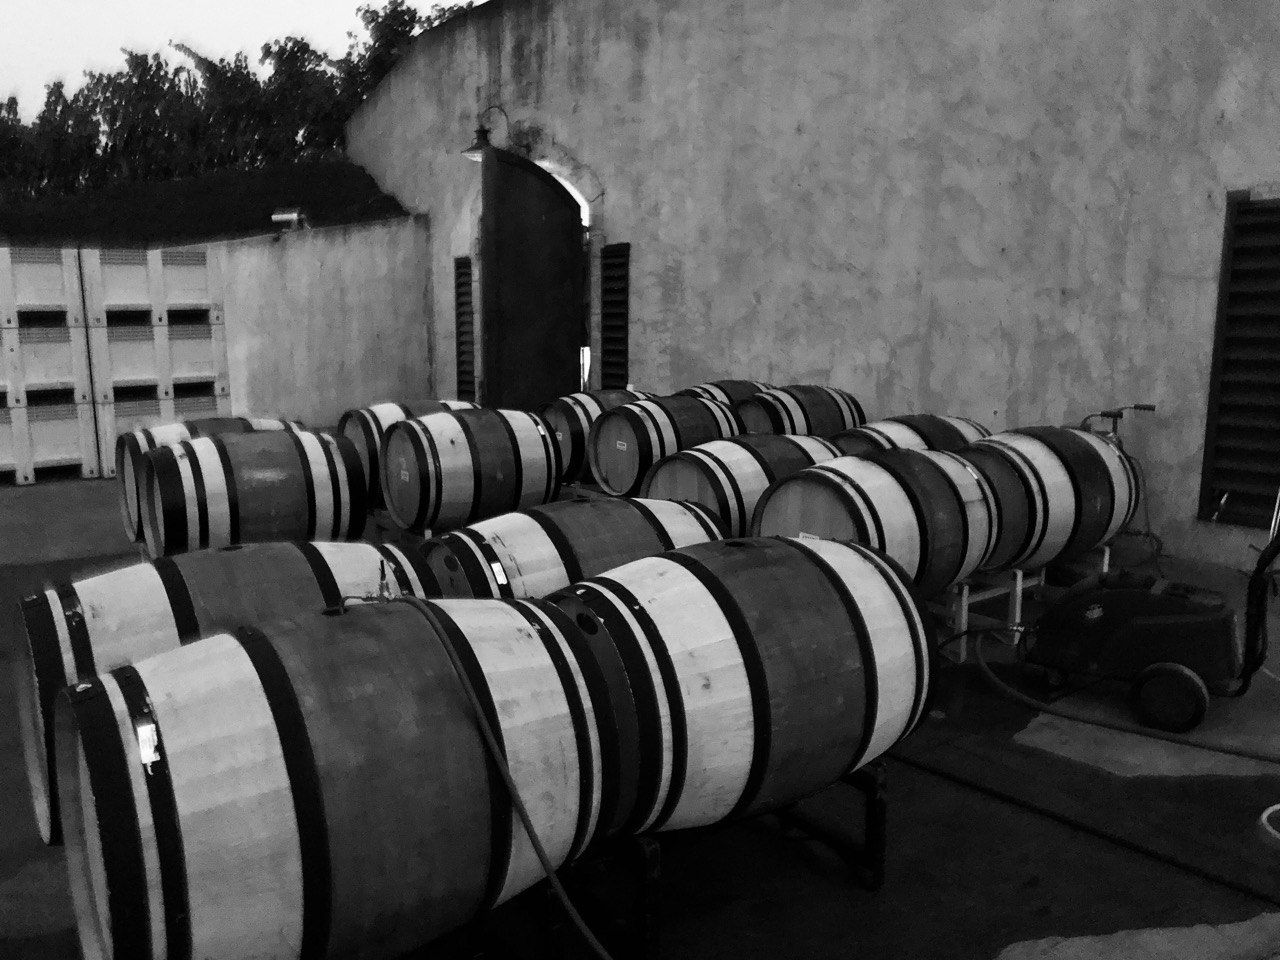 Forthright Winery Barrels Outside Fill